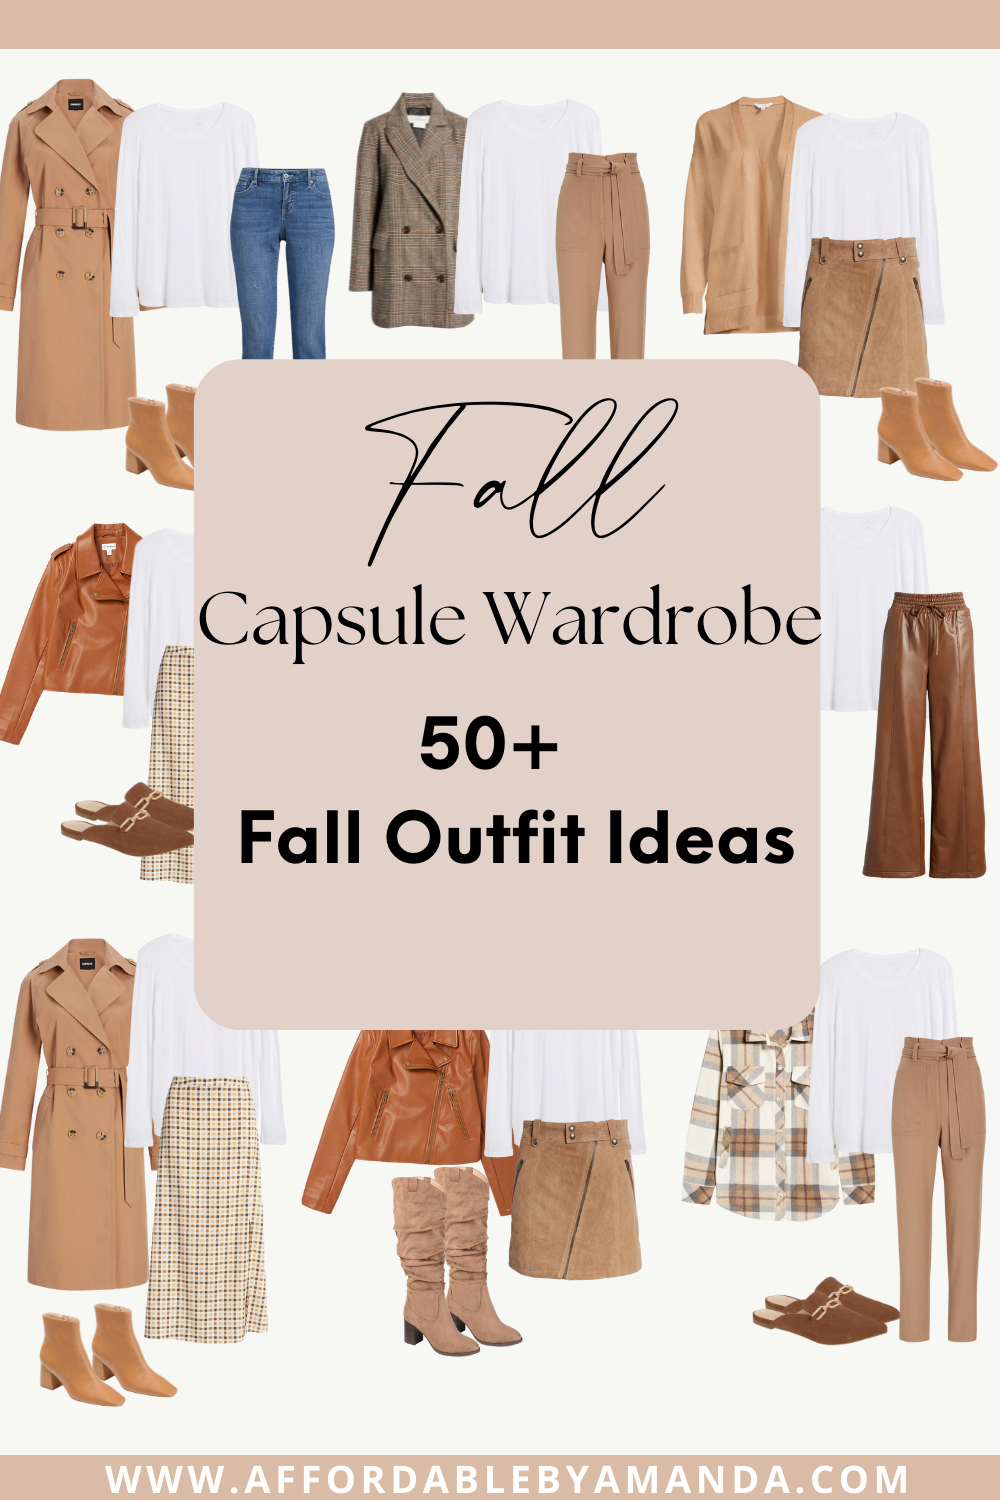 COZY CAPSULE WARDROBE  COMFY CASUAL OUTFITS ON TREND WHEN YOUR